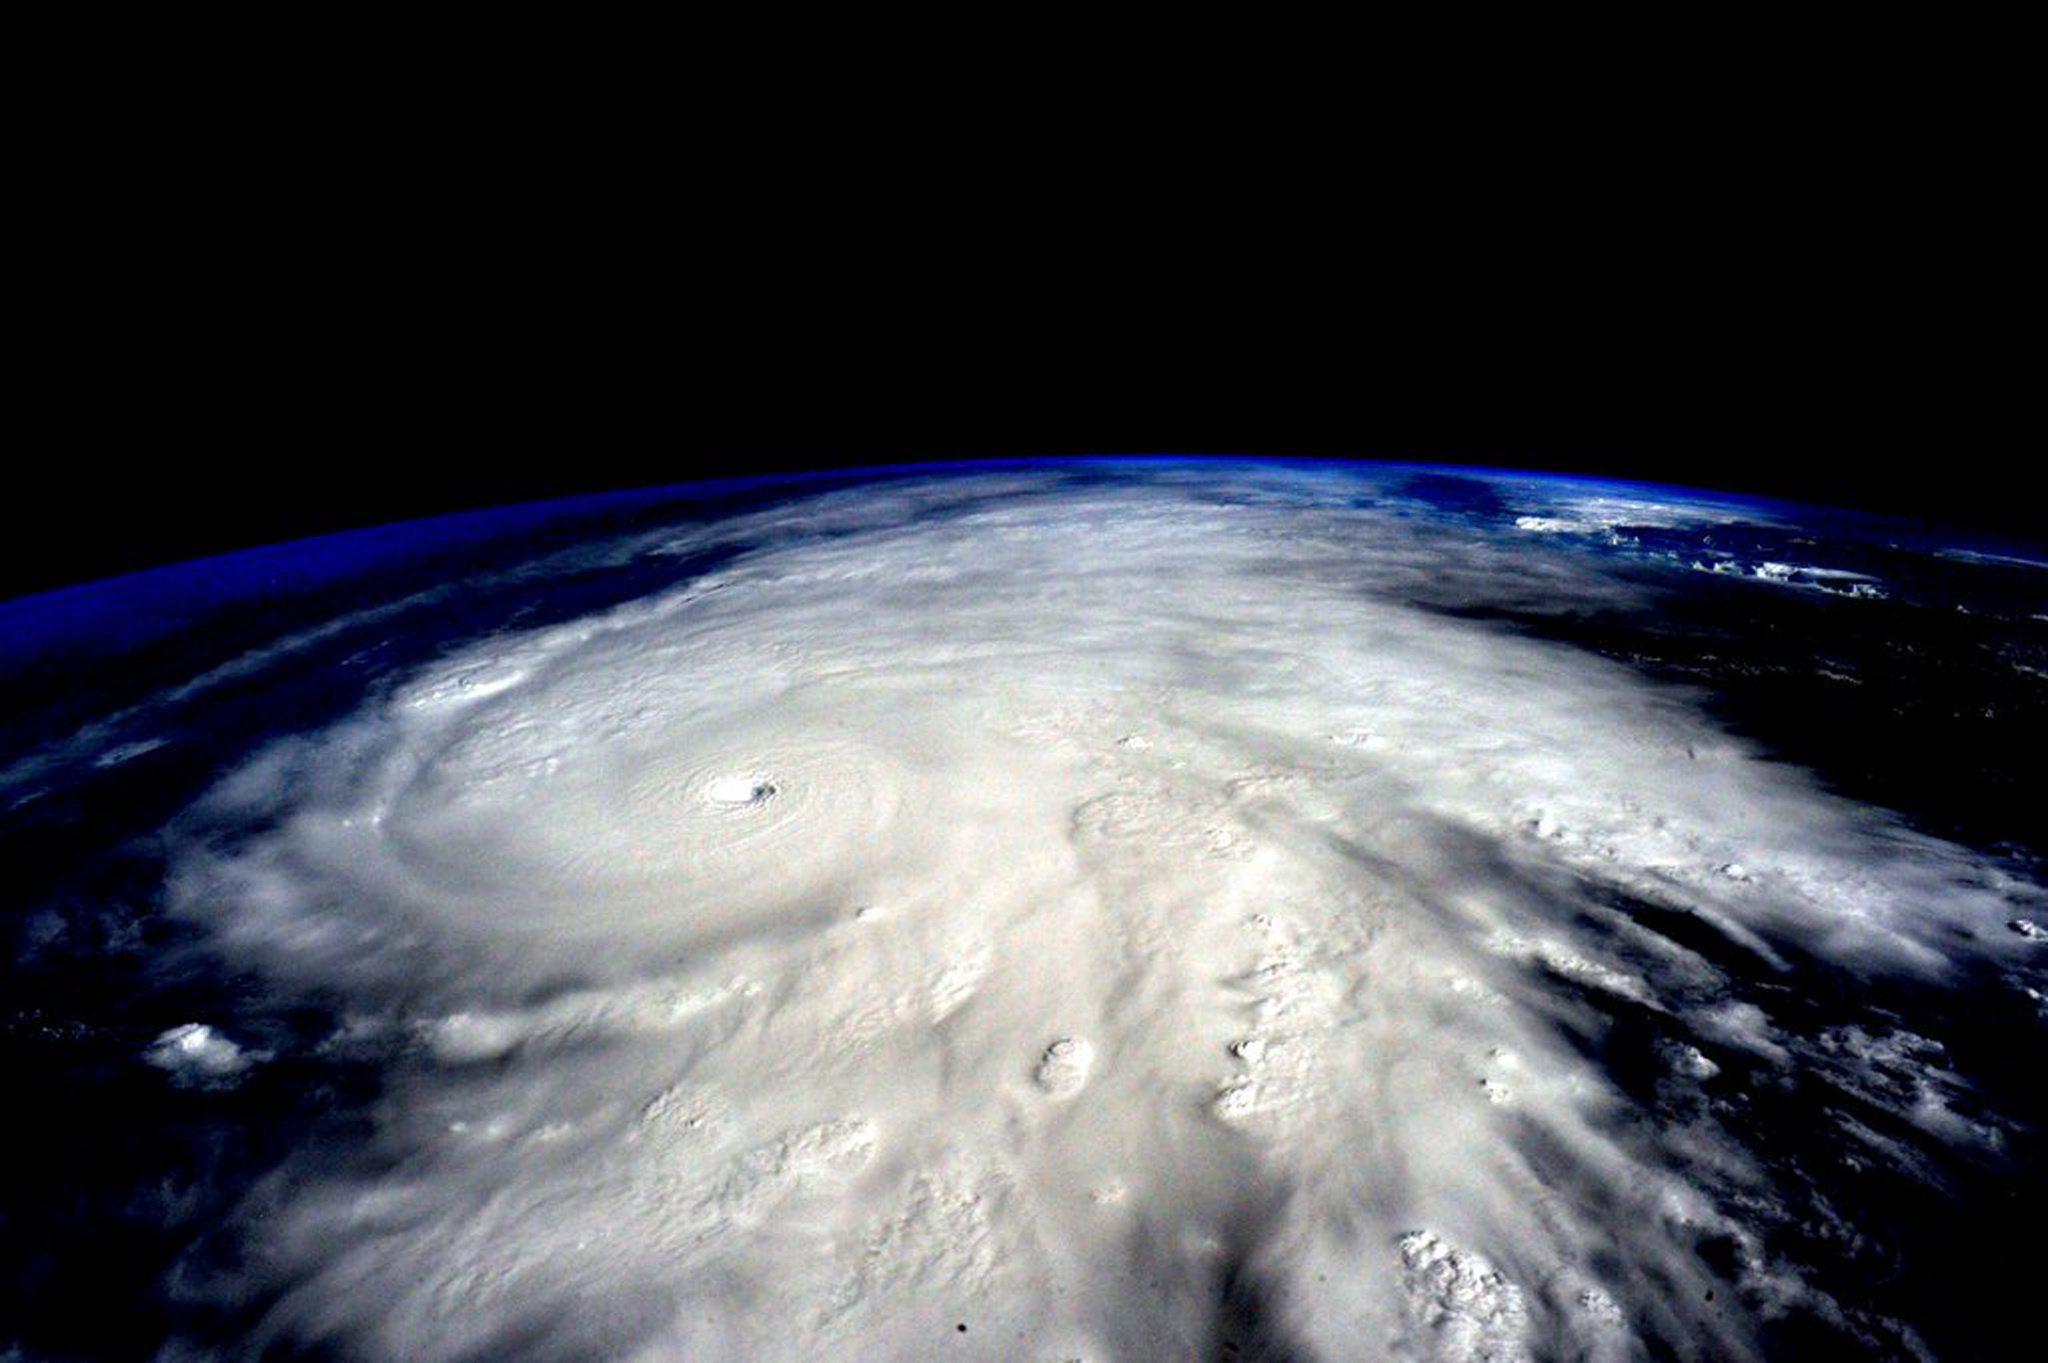 Hurricane Patricia along the western coast of Mexico, as seen from the ISS in 2015. File photo: Scott Kelly via EPA-EFE 